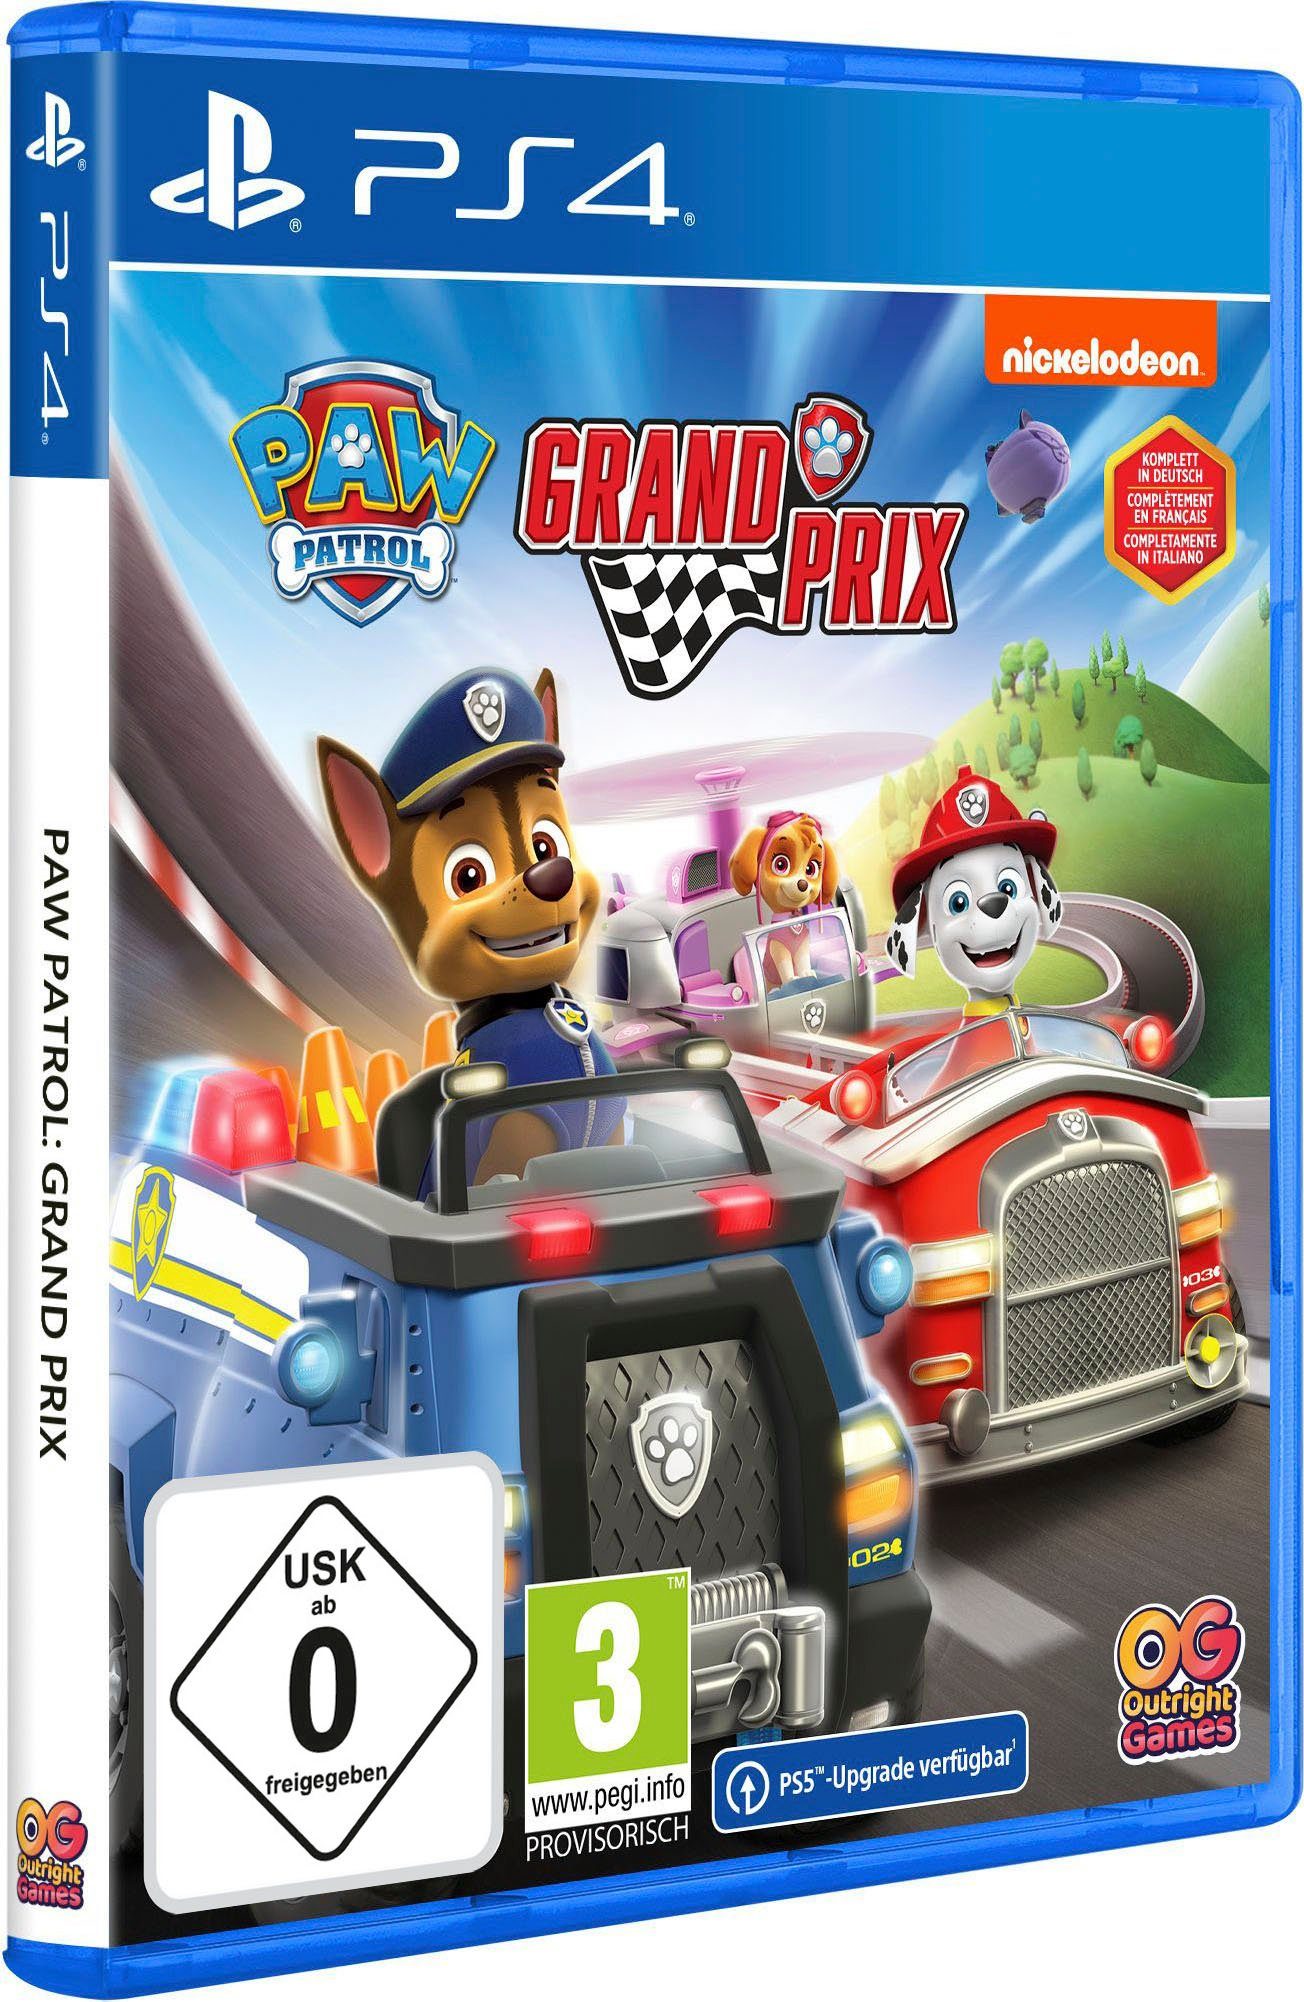 Outright Games Paw Prix 4 Patrol: Grand PlayStation